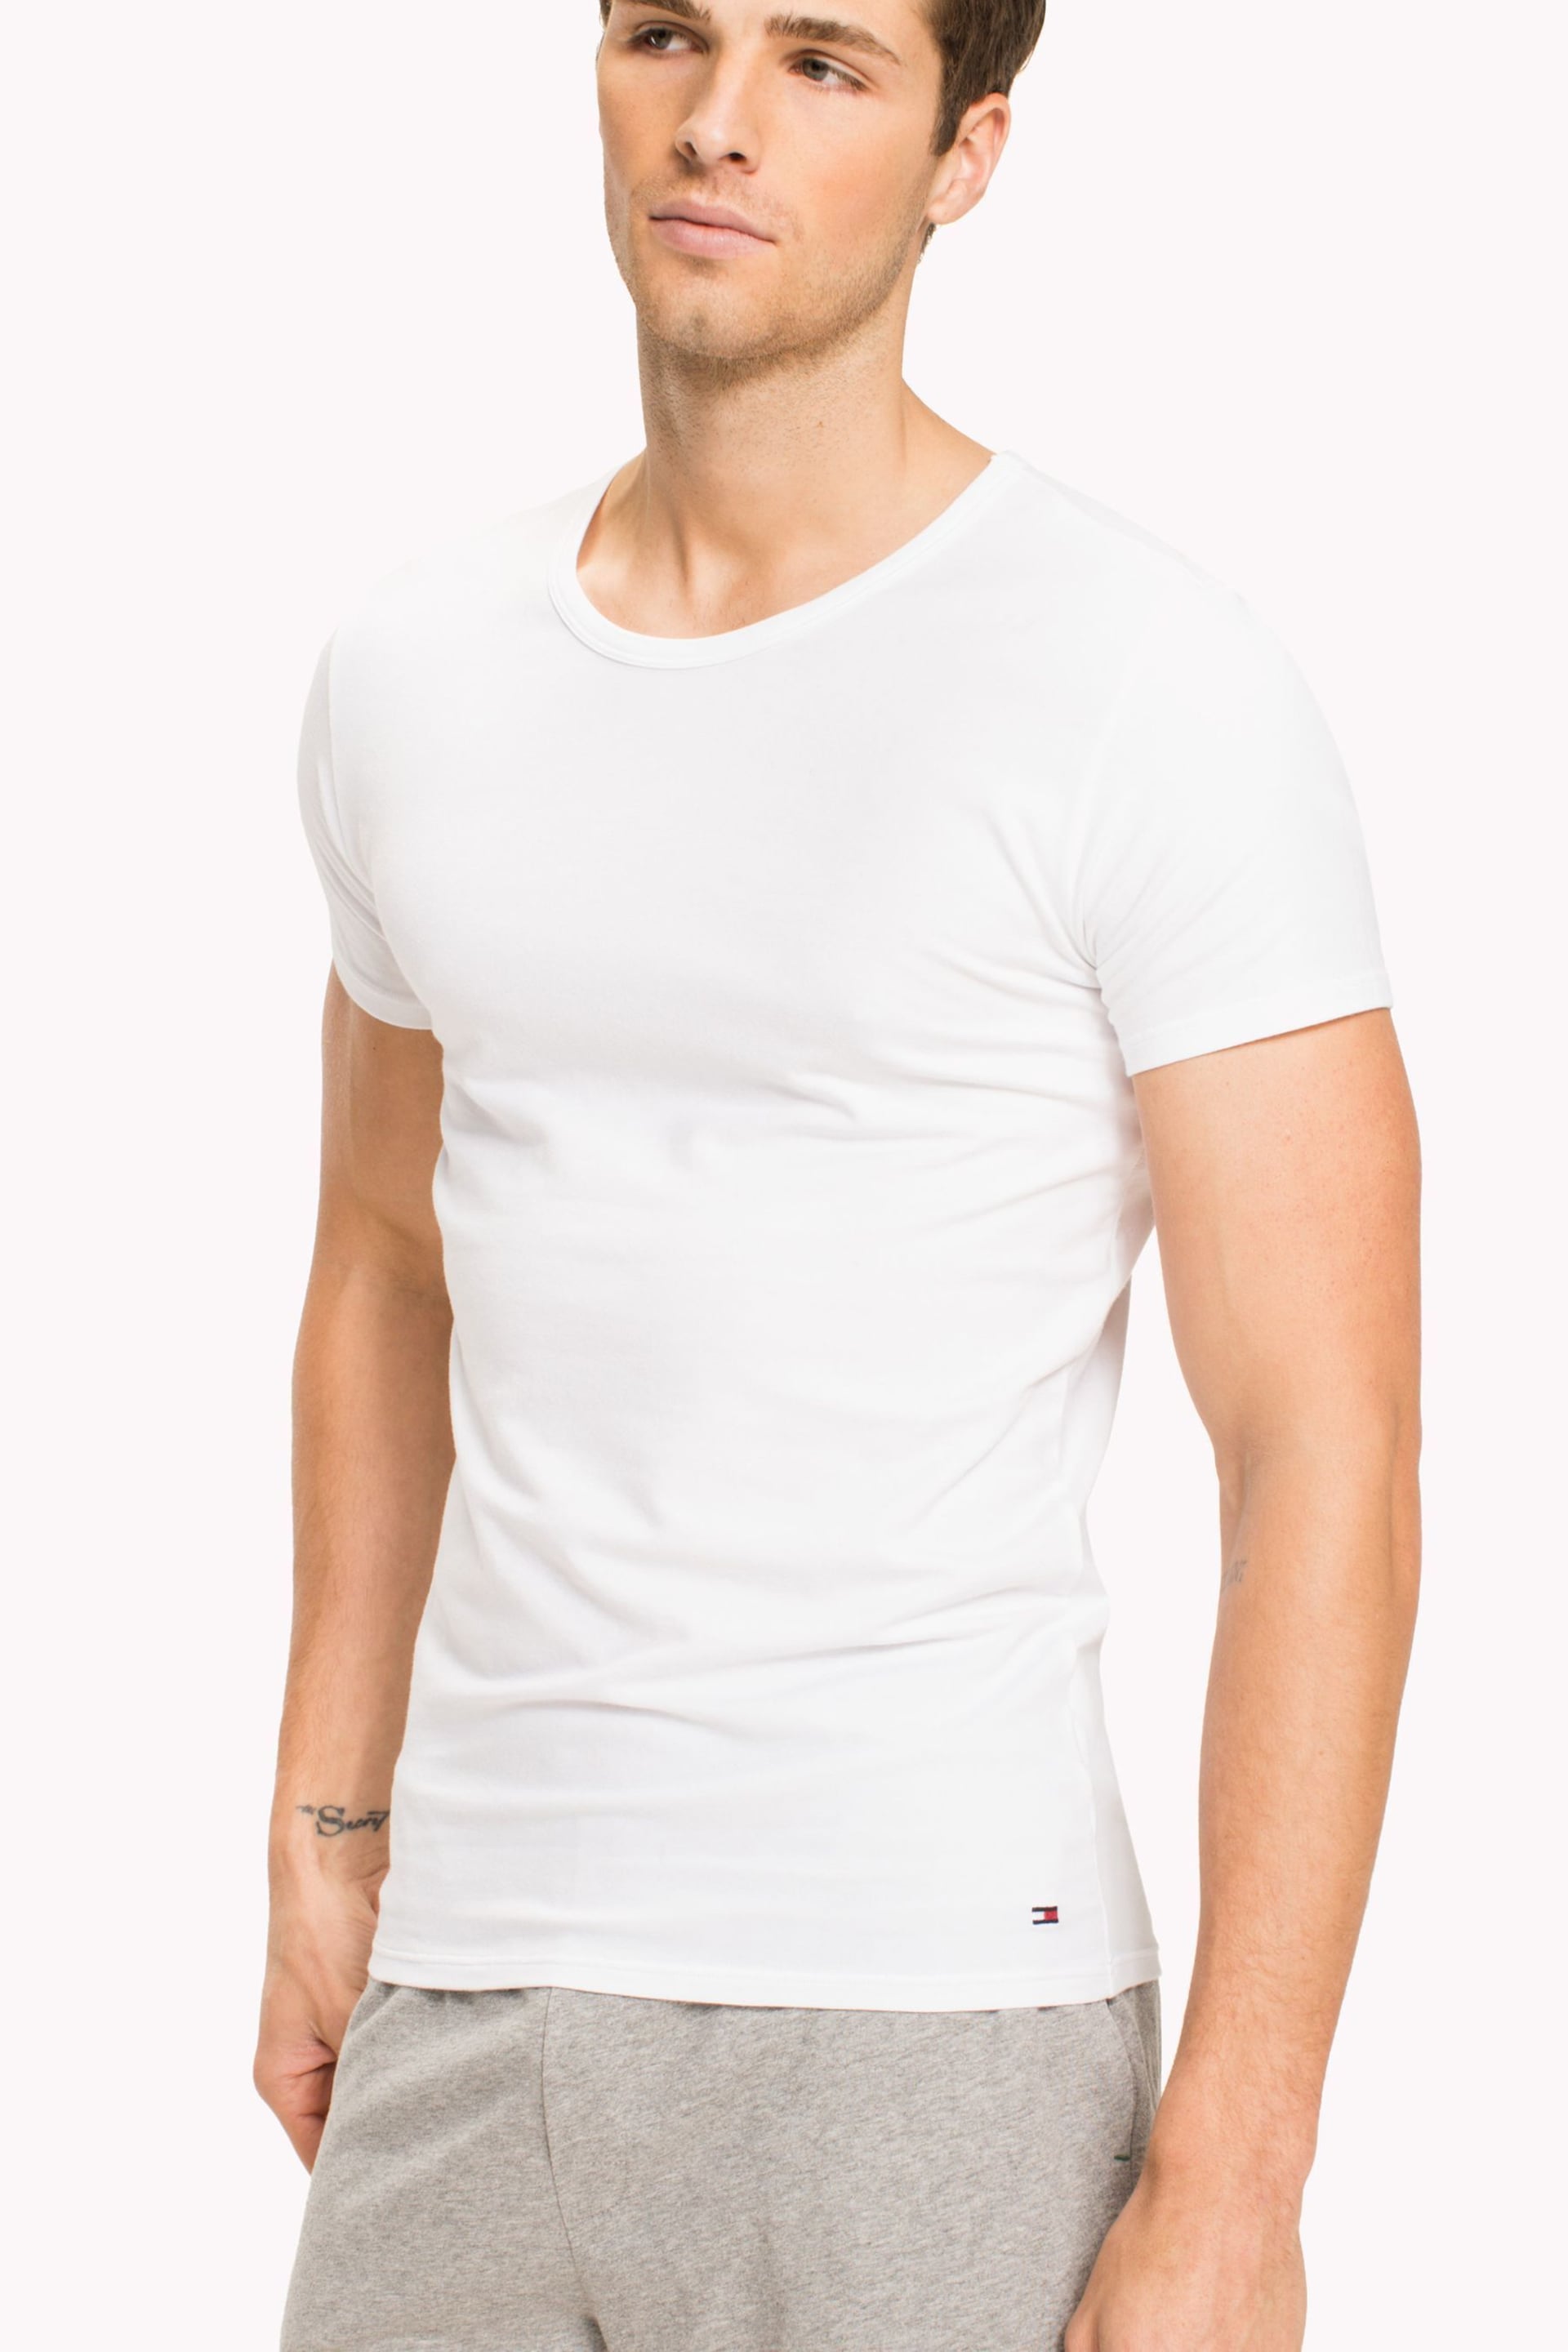 Tommy Hilfiger Premium Lounge T-Shirts 3 Pack - Image 3 of 5